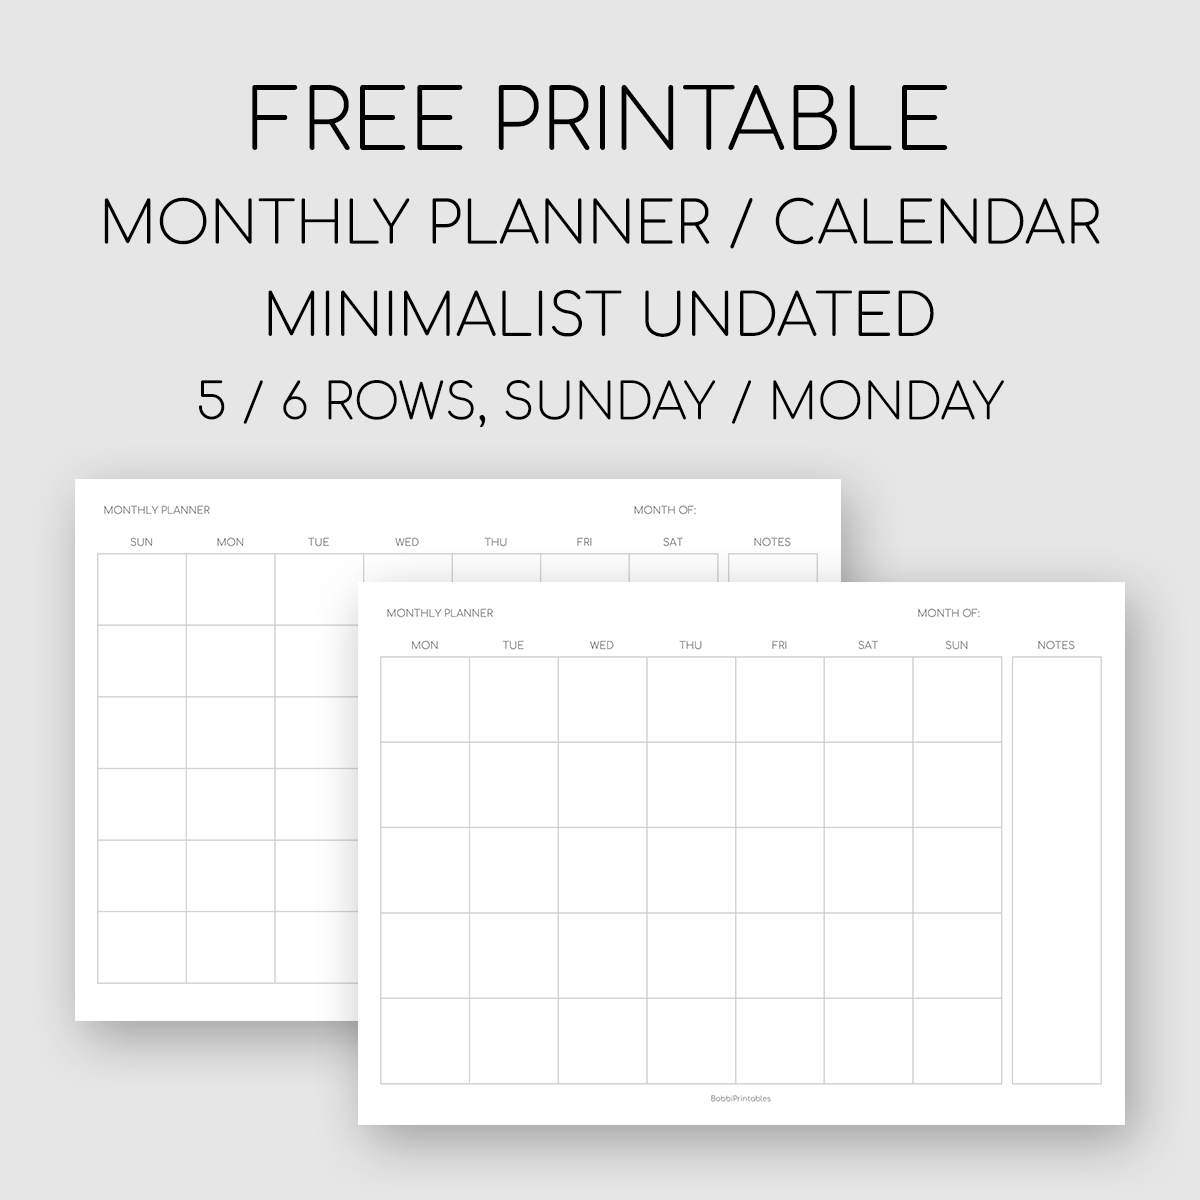 Collect Undated Monthly Planner Pages